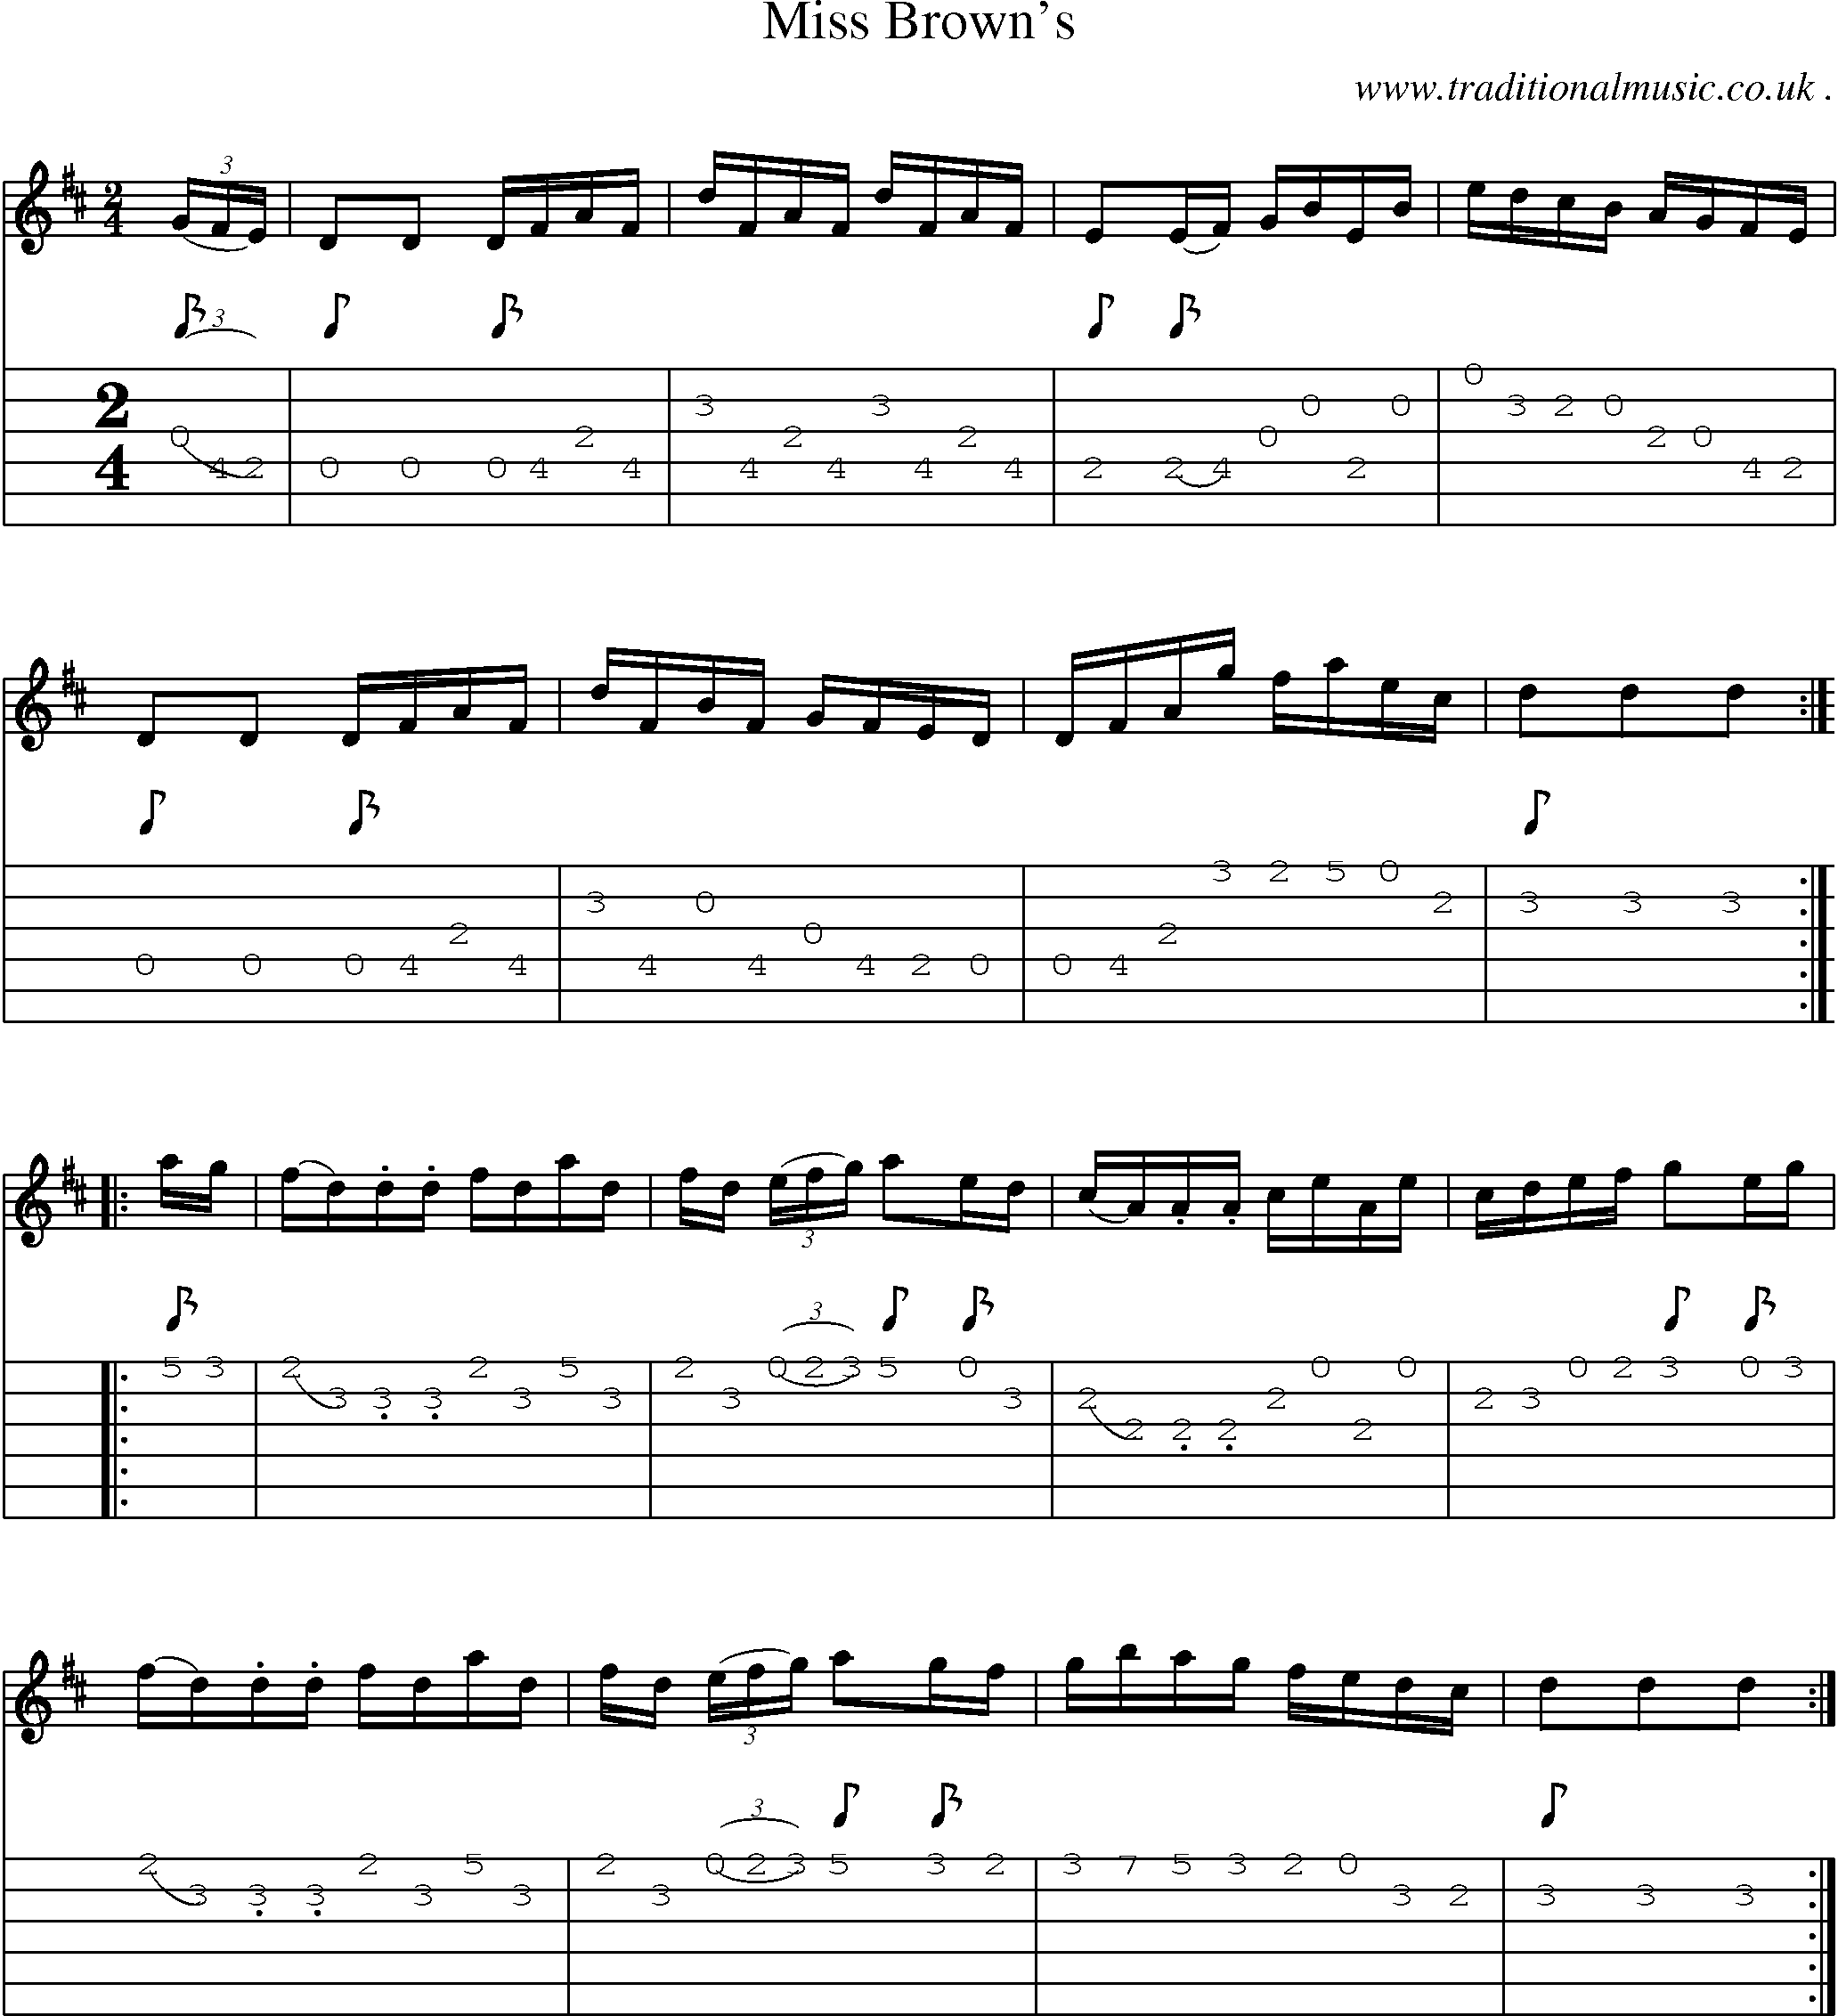 Sheet-Music and Guitar Tabs for Miss Browns